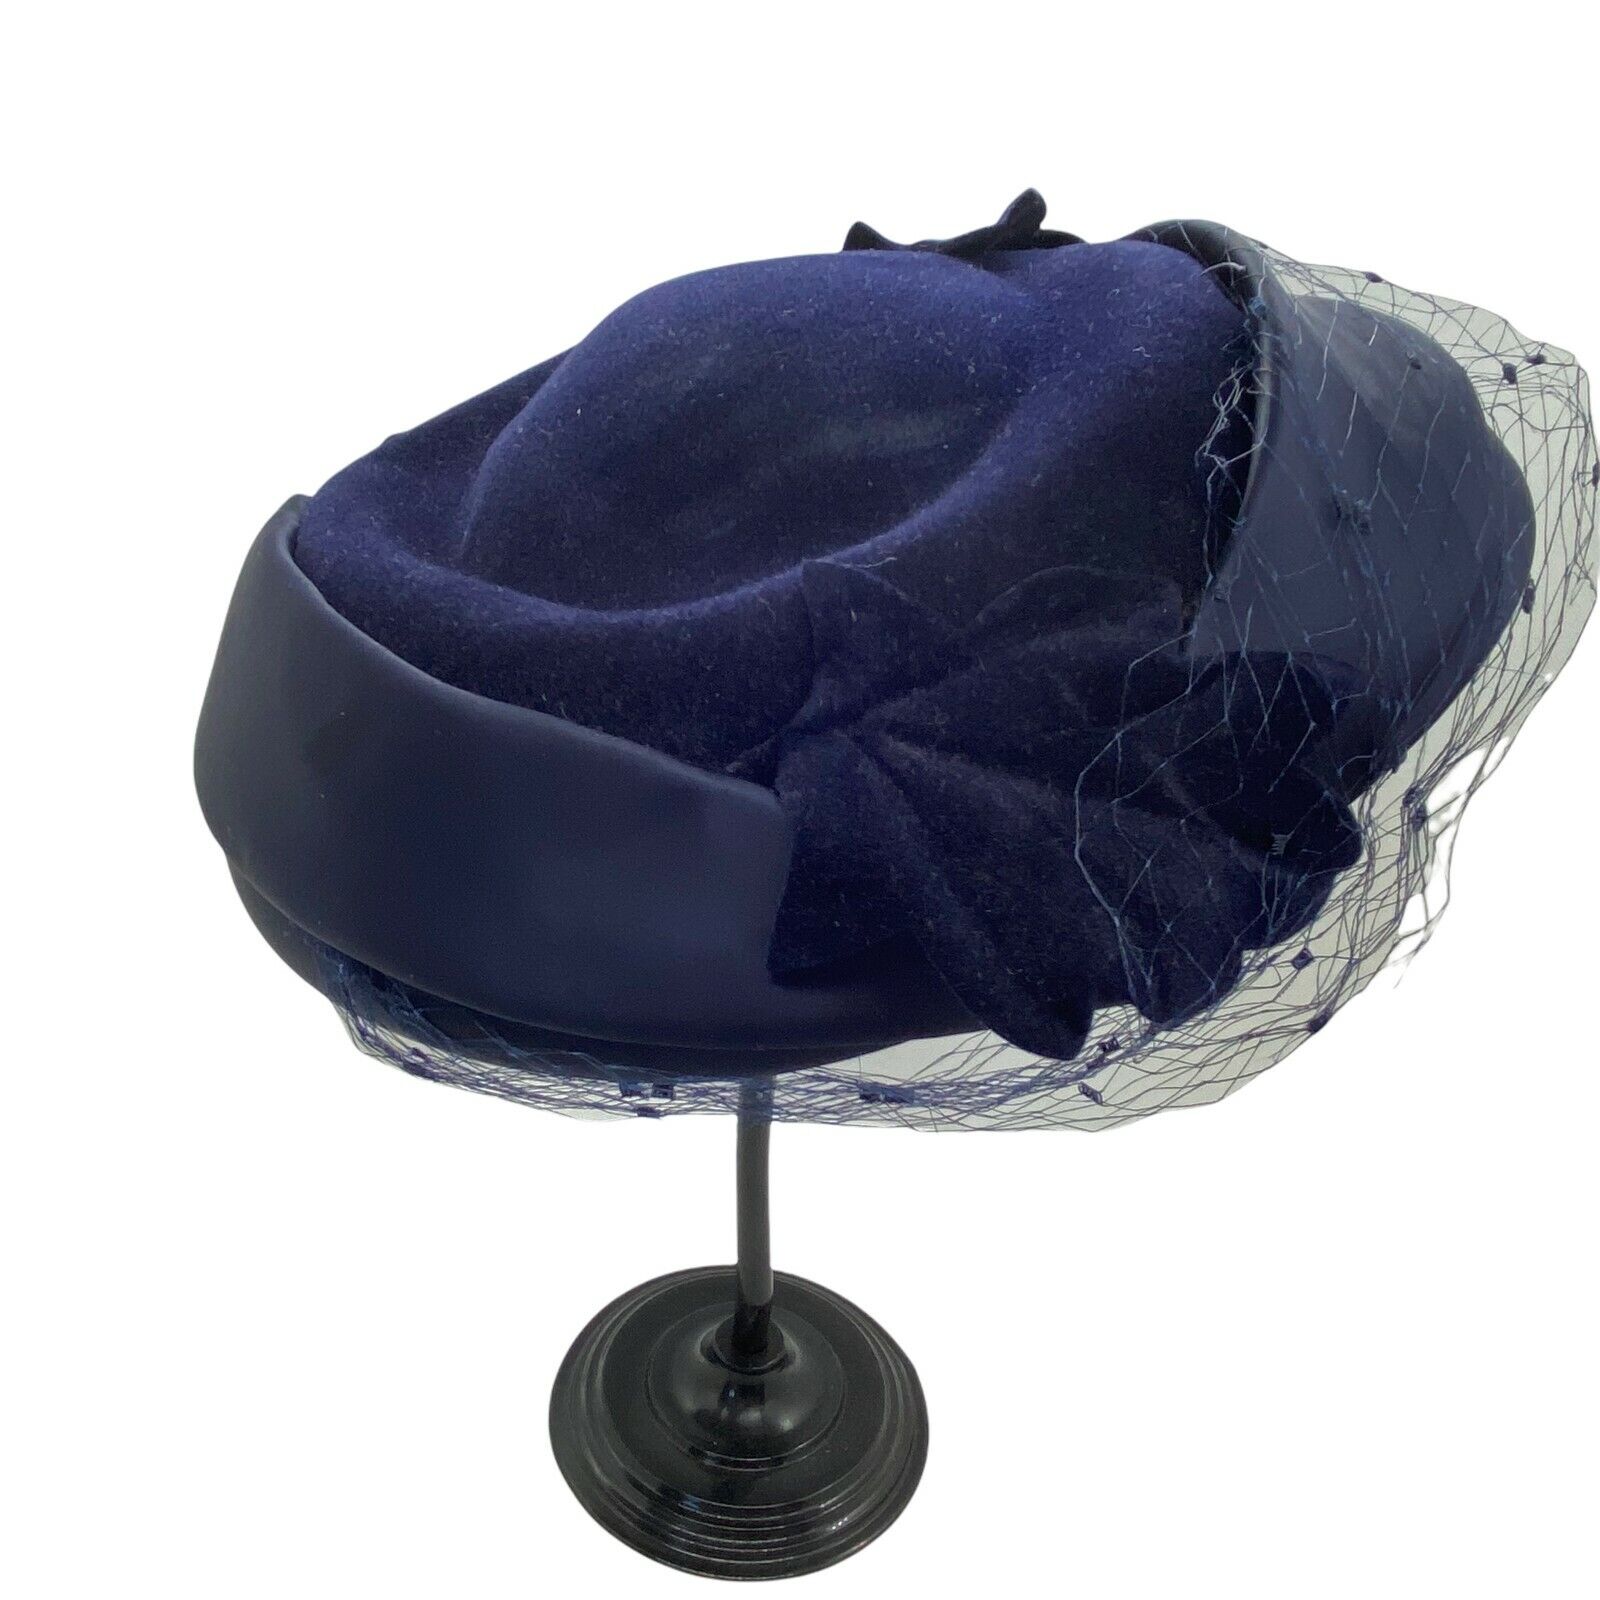  Beret Hat Vintage Contessa Women\'s Navy Felted Fur With Netting Size 22-1/2